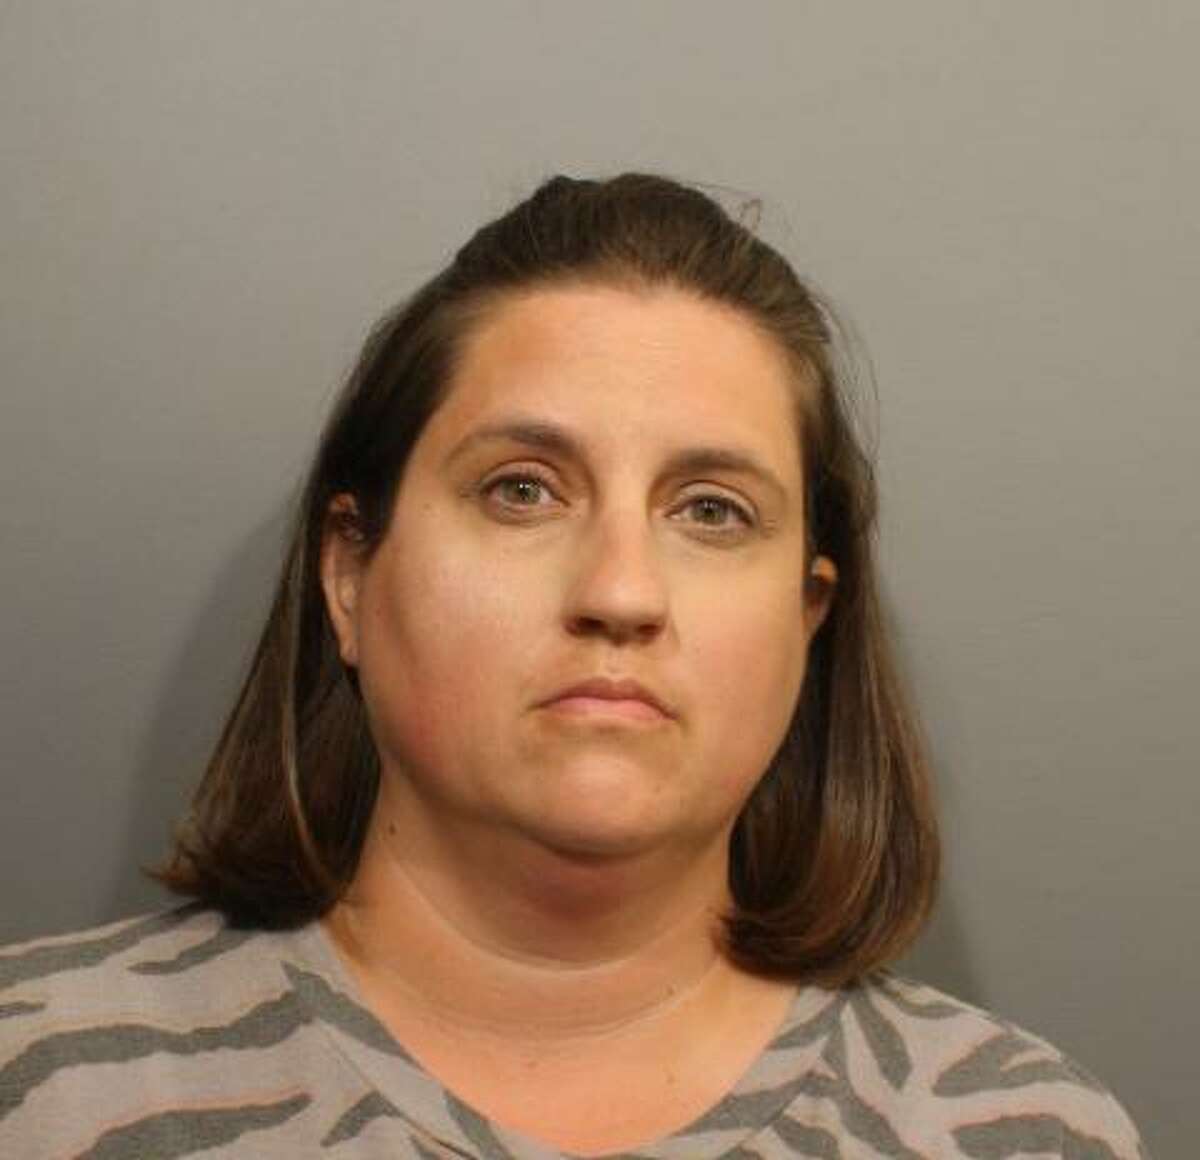 Amy Tingets, 39, of Norwalk, turned herself in last week on a warrant, charging her with first-degree assault and risk of injury to a child, police said.